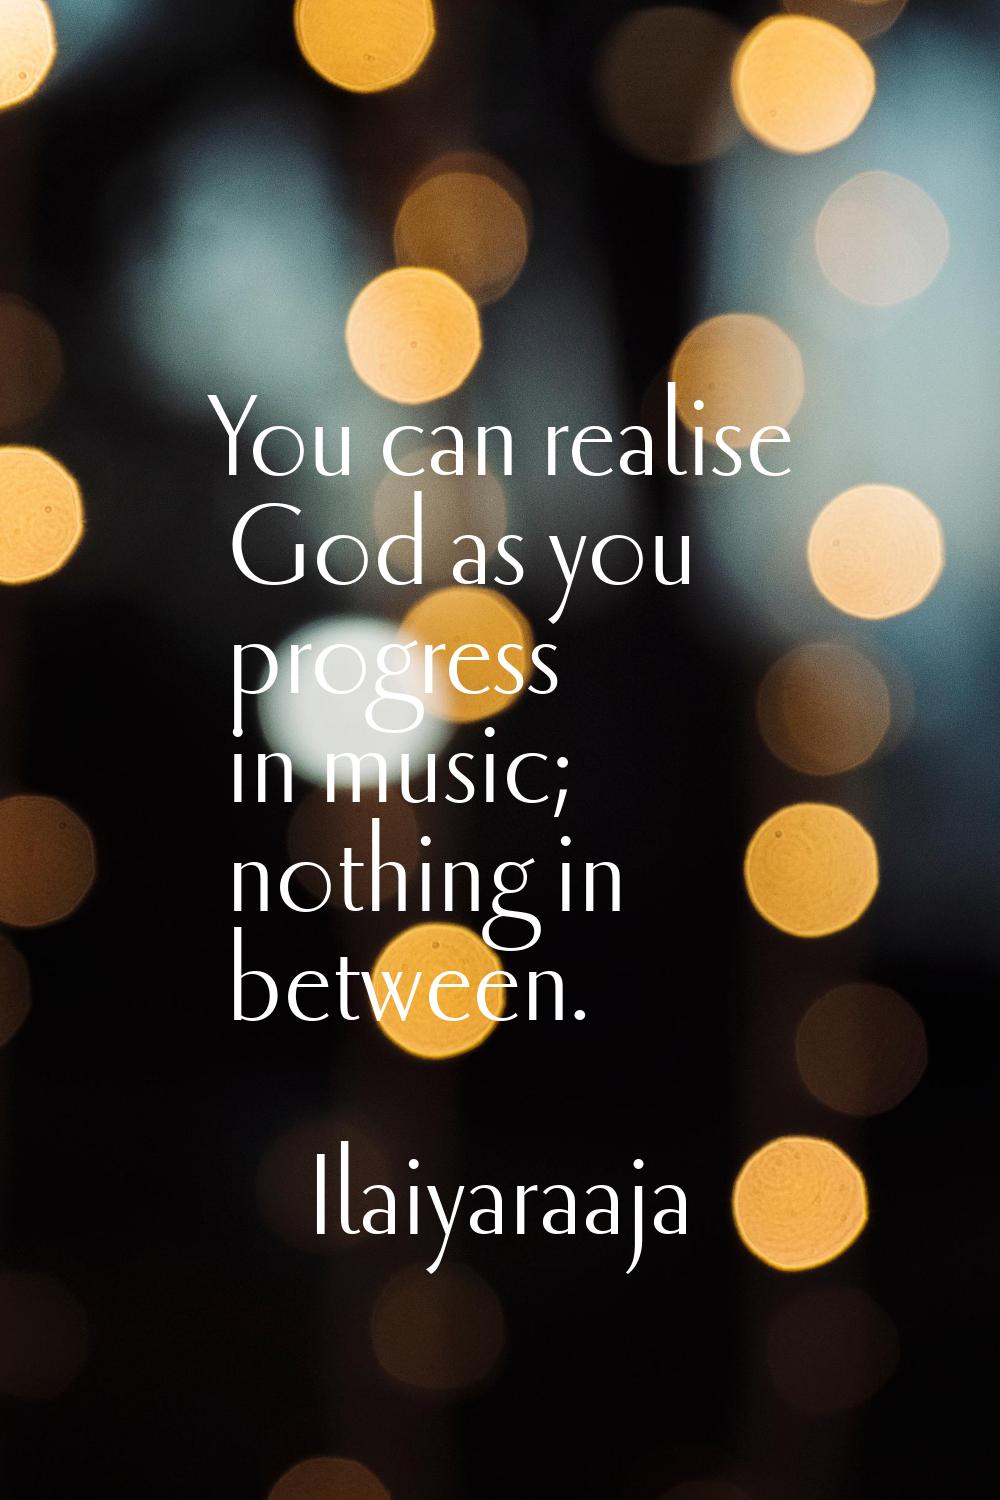 You can realise God as you progress in music; nothing in between.